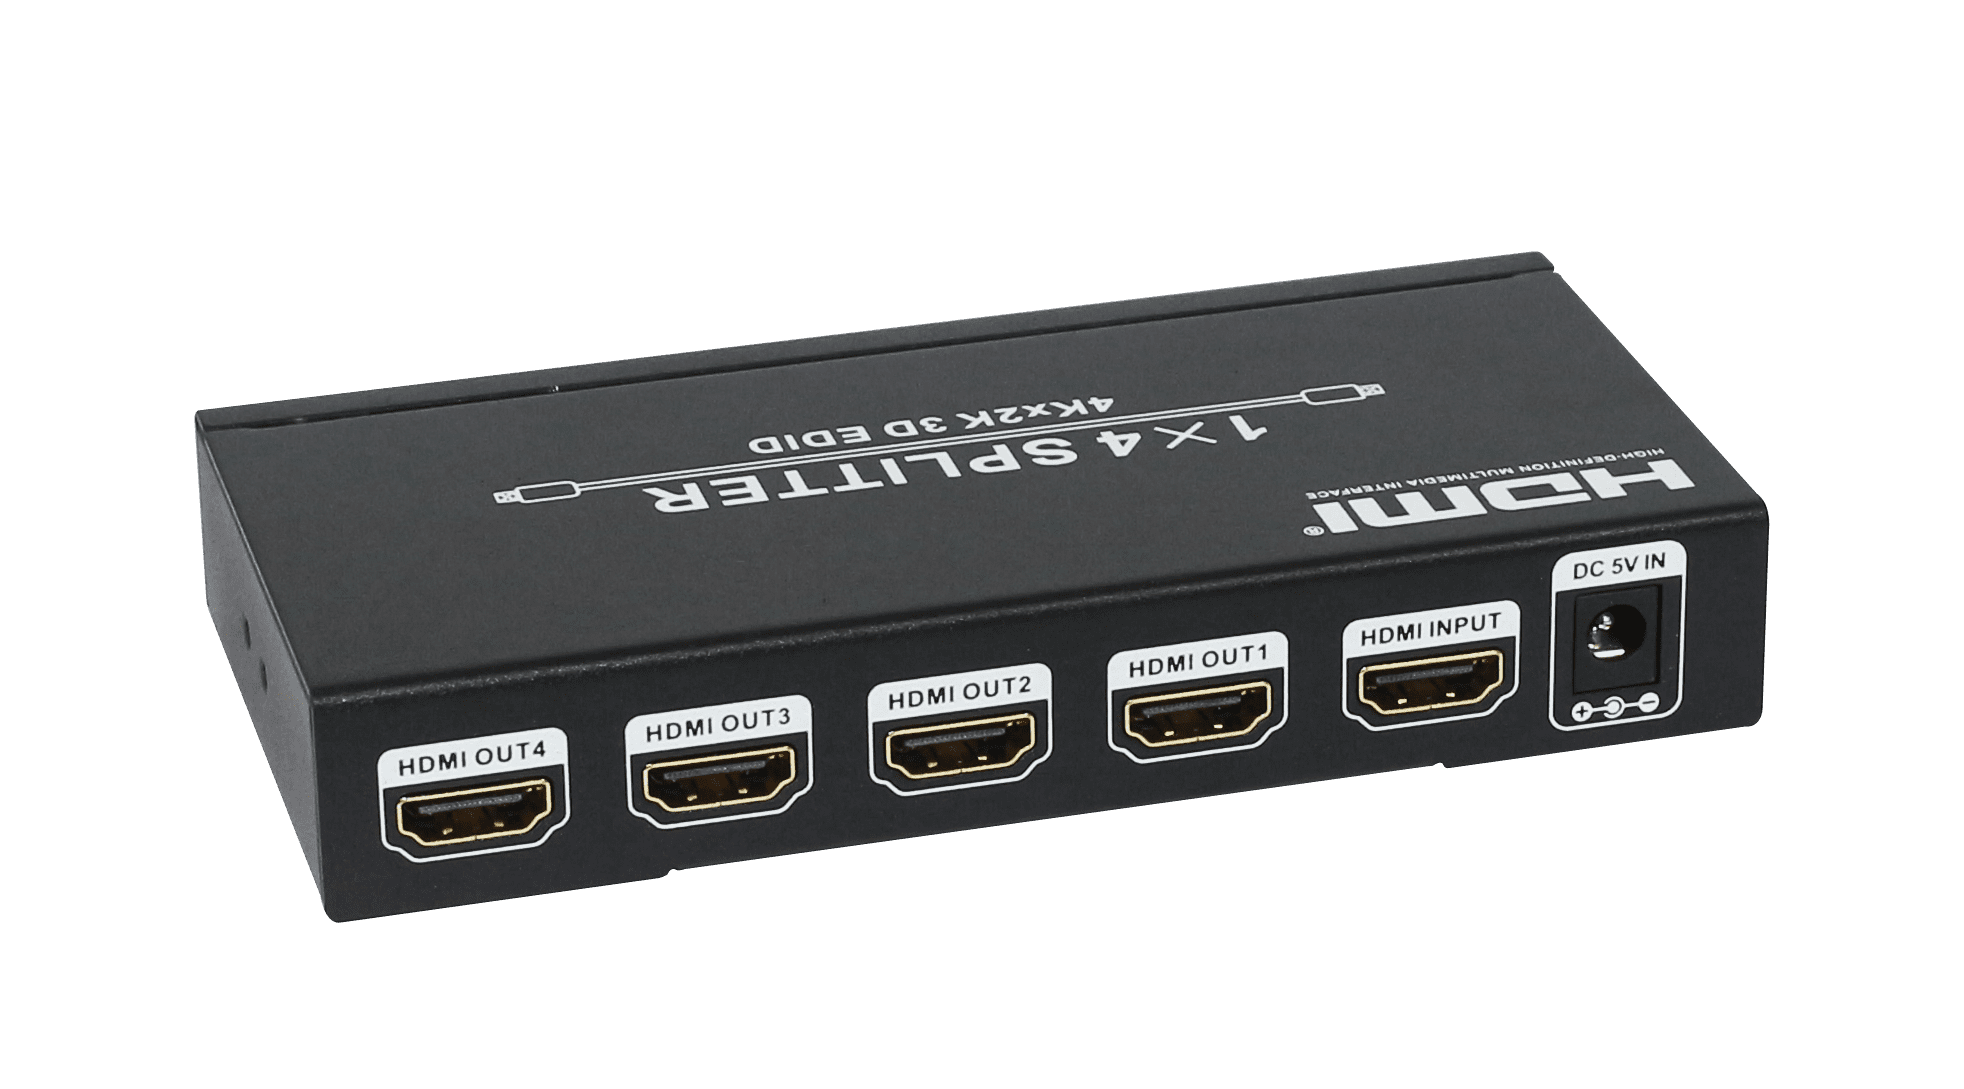 hdcvt-1x4-hdmi-1.4-splitter-supports-hdcp1.4-and-edid-1-image